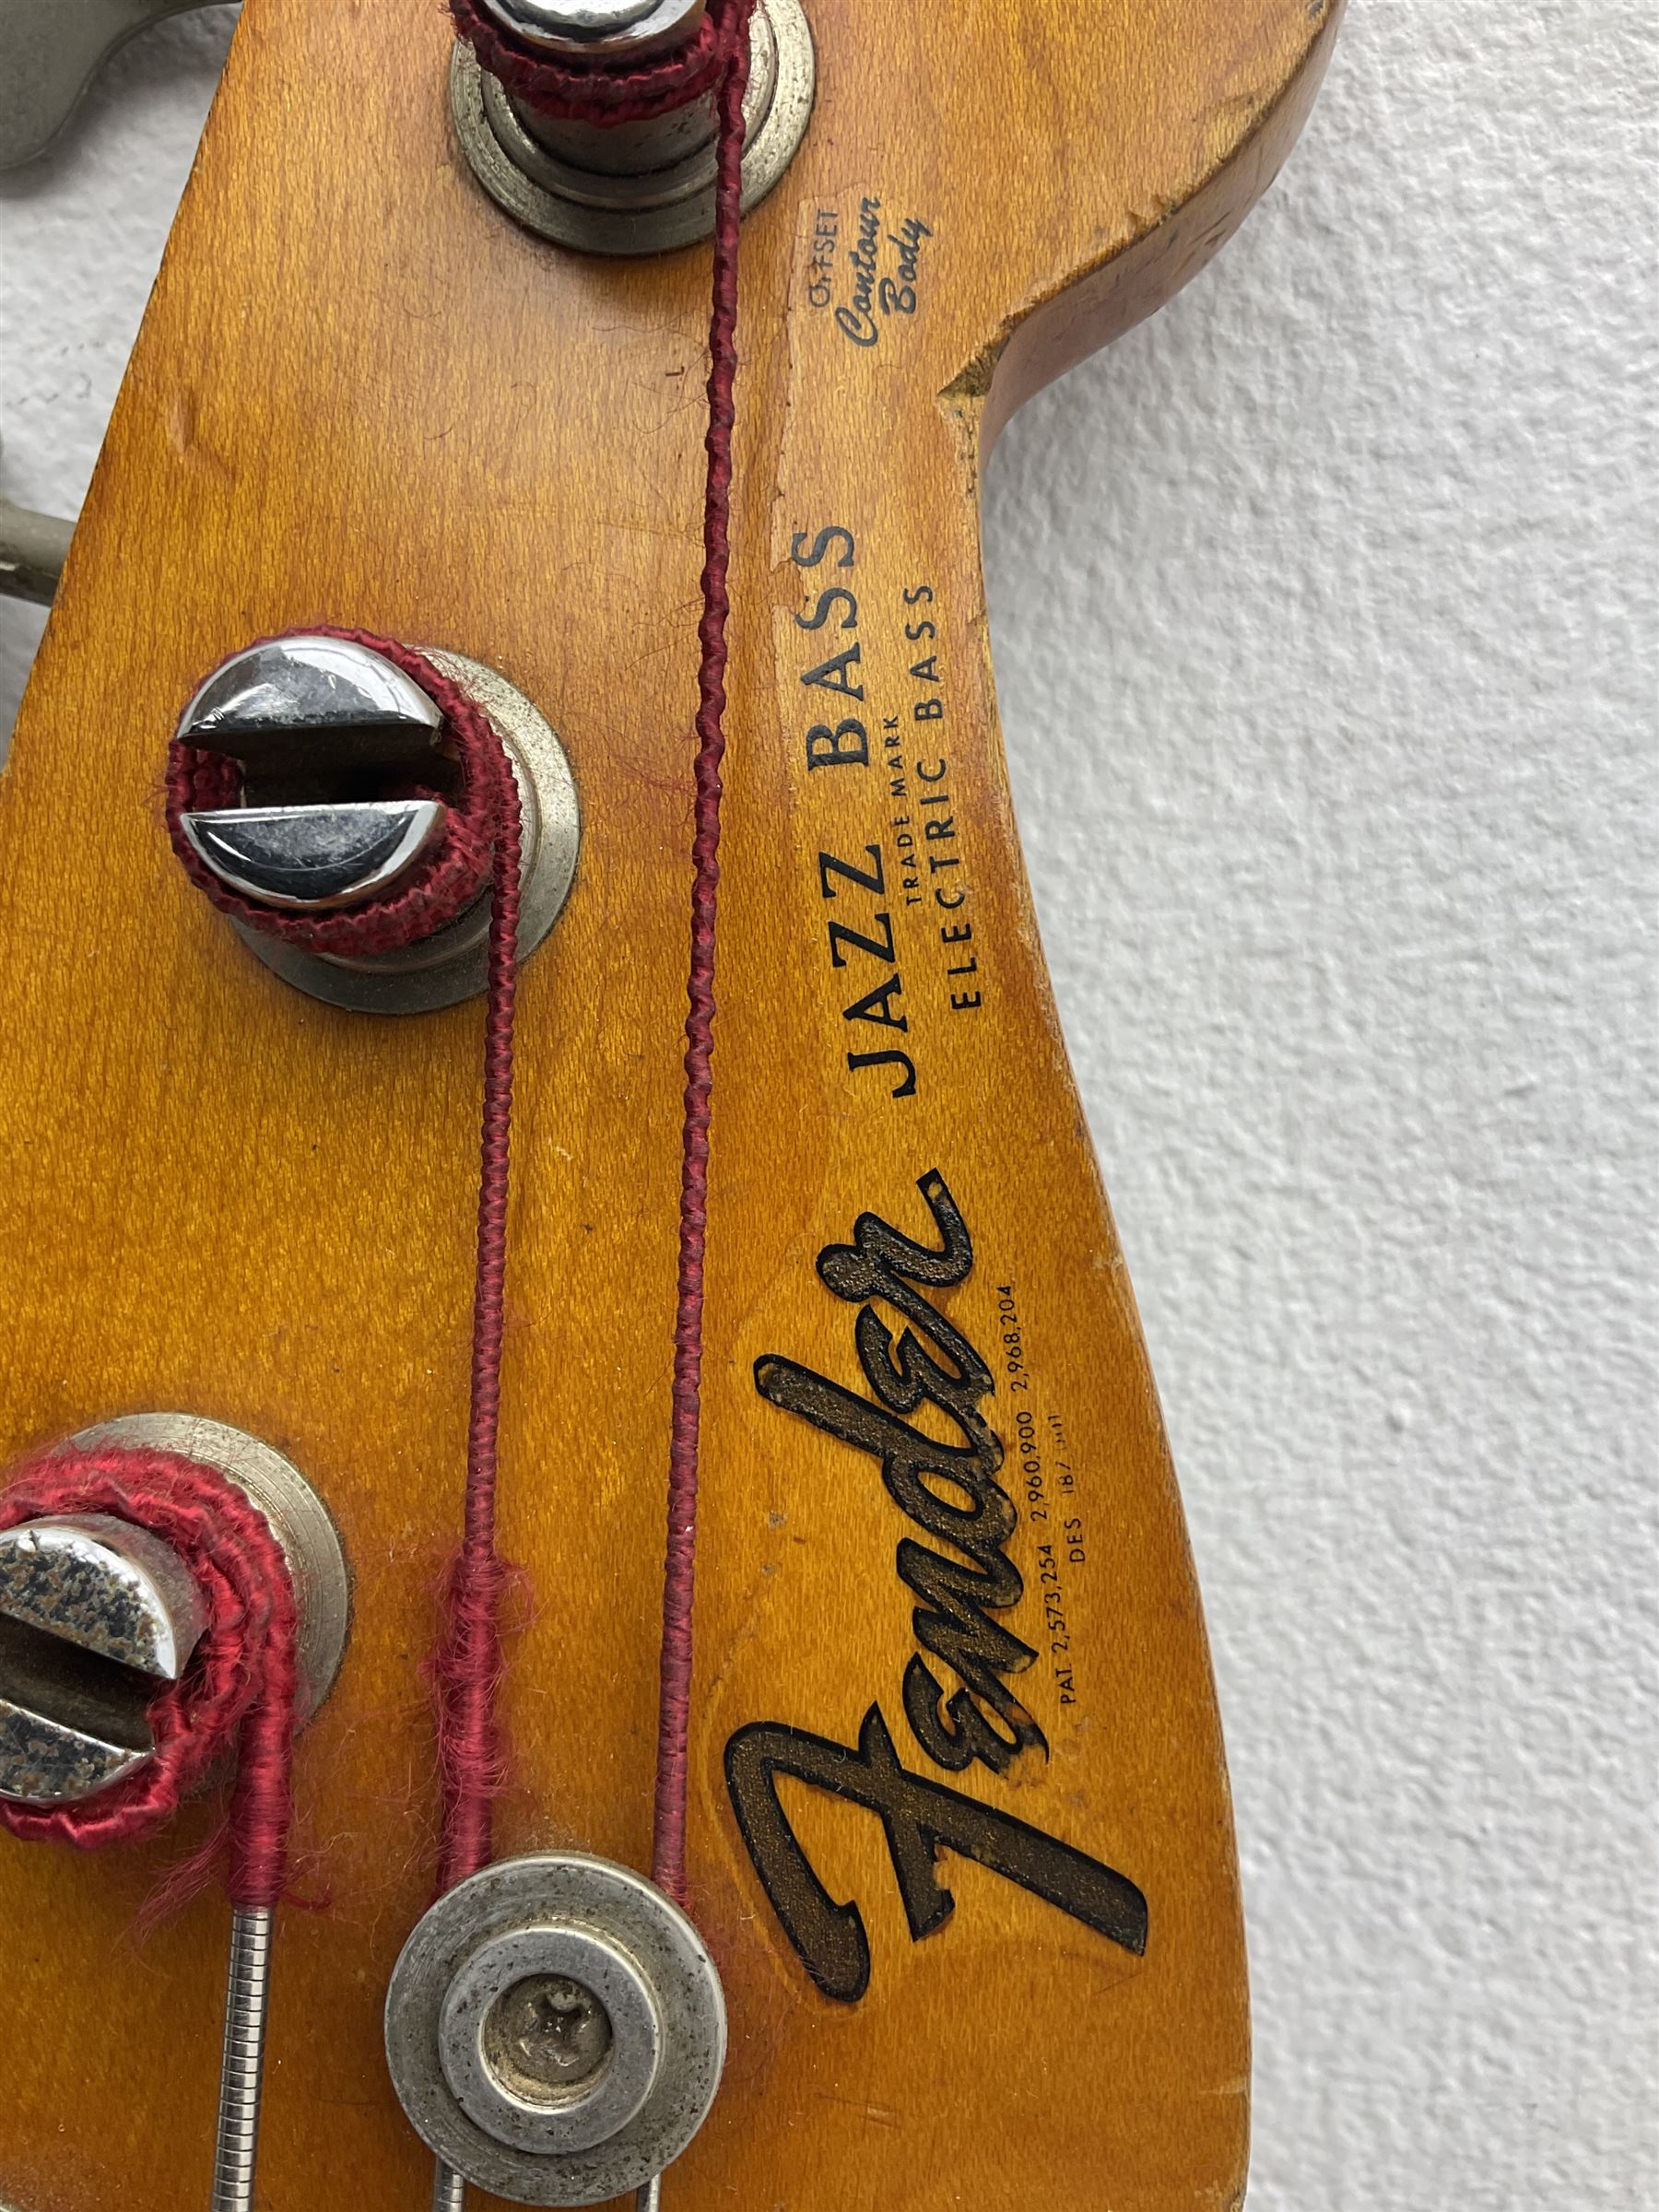 1963 Fender Jazz three-knob bass guitar; impressed with date code 7AUG63A on end of neck and serial - Image 10 of 22